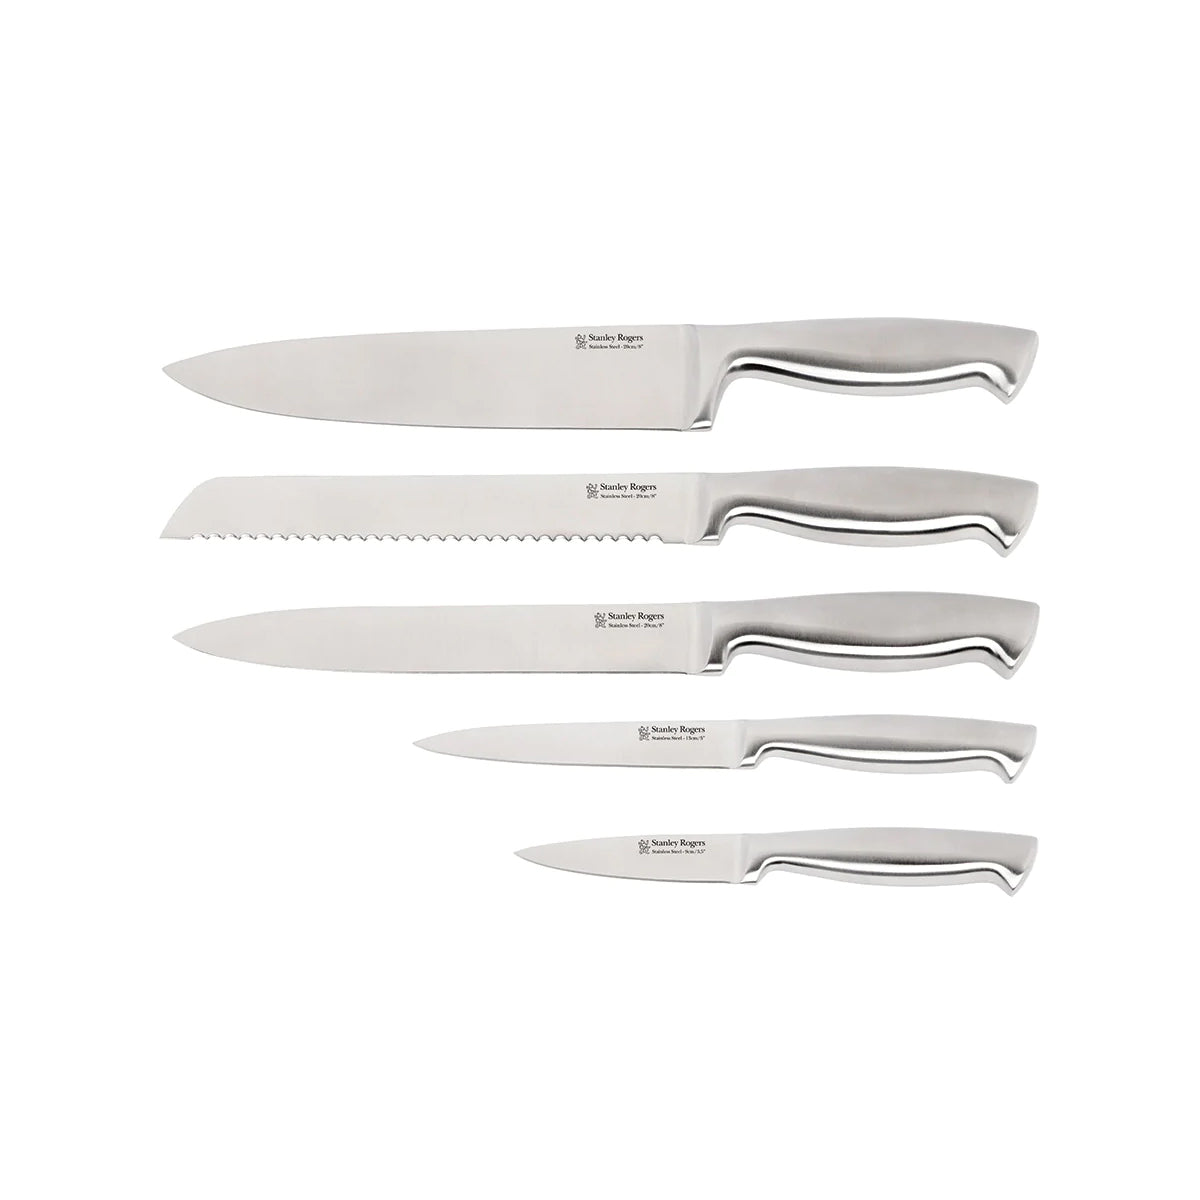 Beautiful 6 Piece Stainless Steel Knife Set in Black Champagne